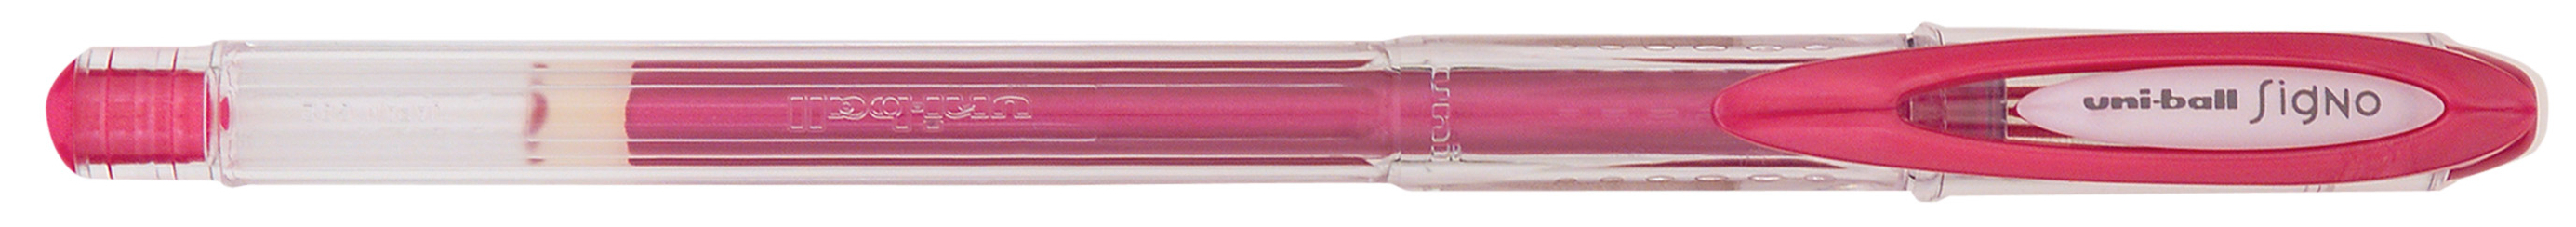 UNI-BALL Signo Noble Metal 0.8mm UM-120NM RED rouge